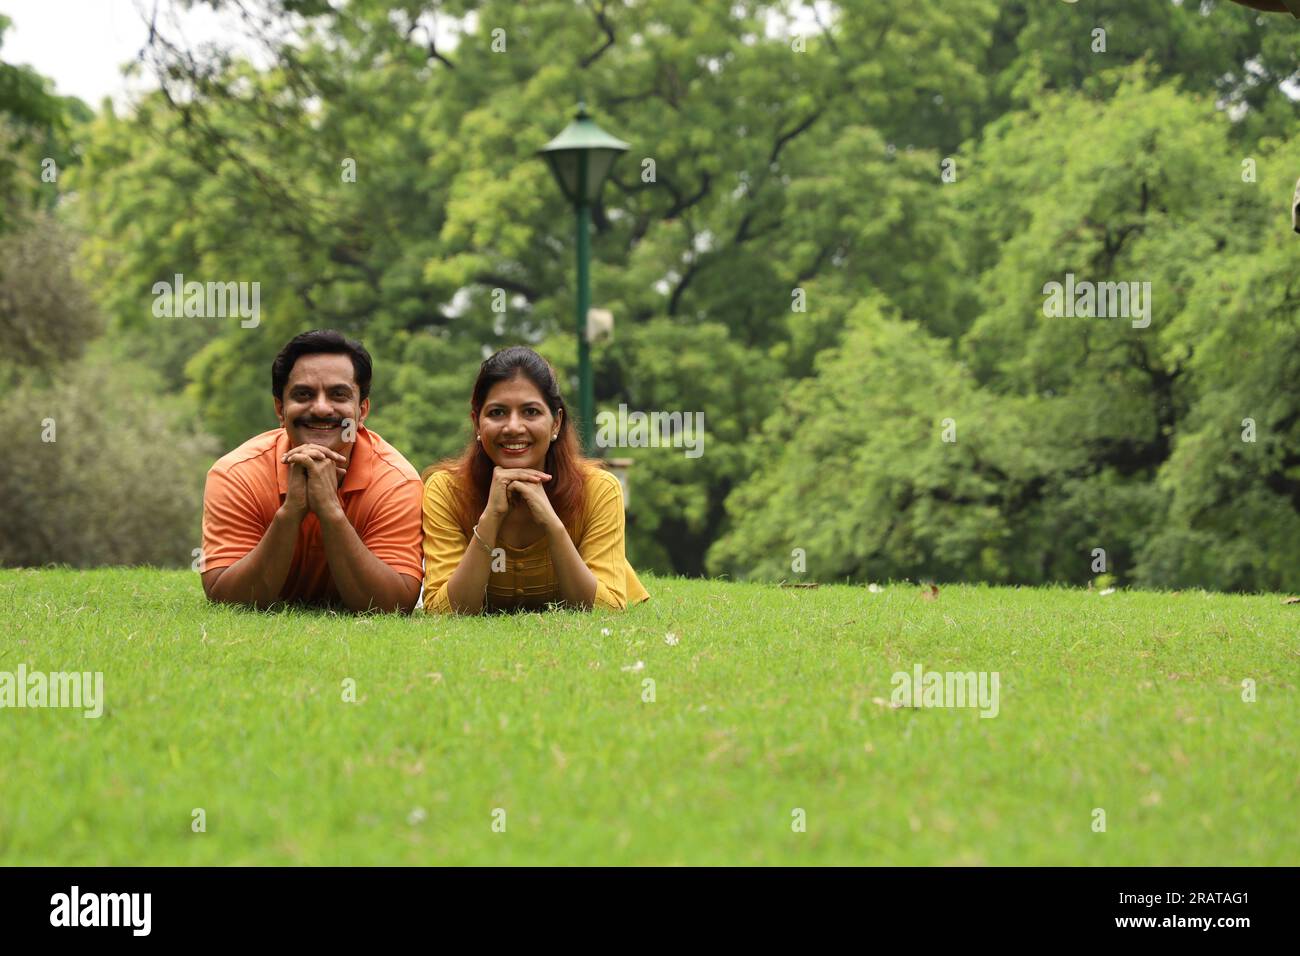 Young happy couple leaning together on grass in a public park early morning in positive atmosphere. Green, tranquil and serene environment. Stock Photo